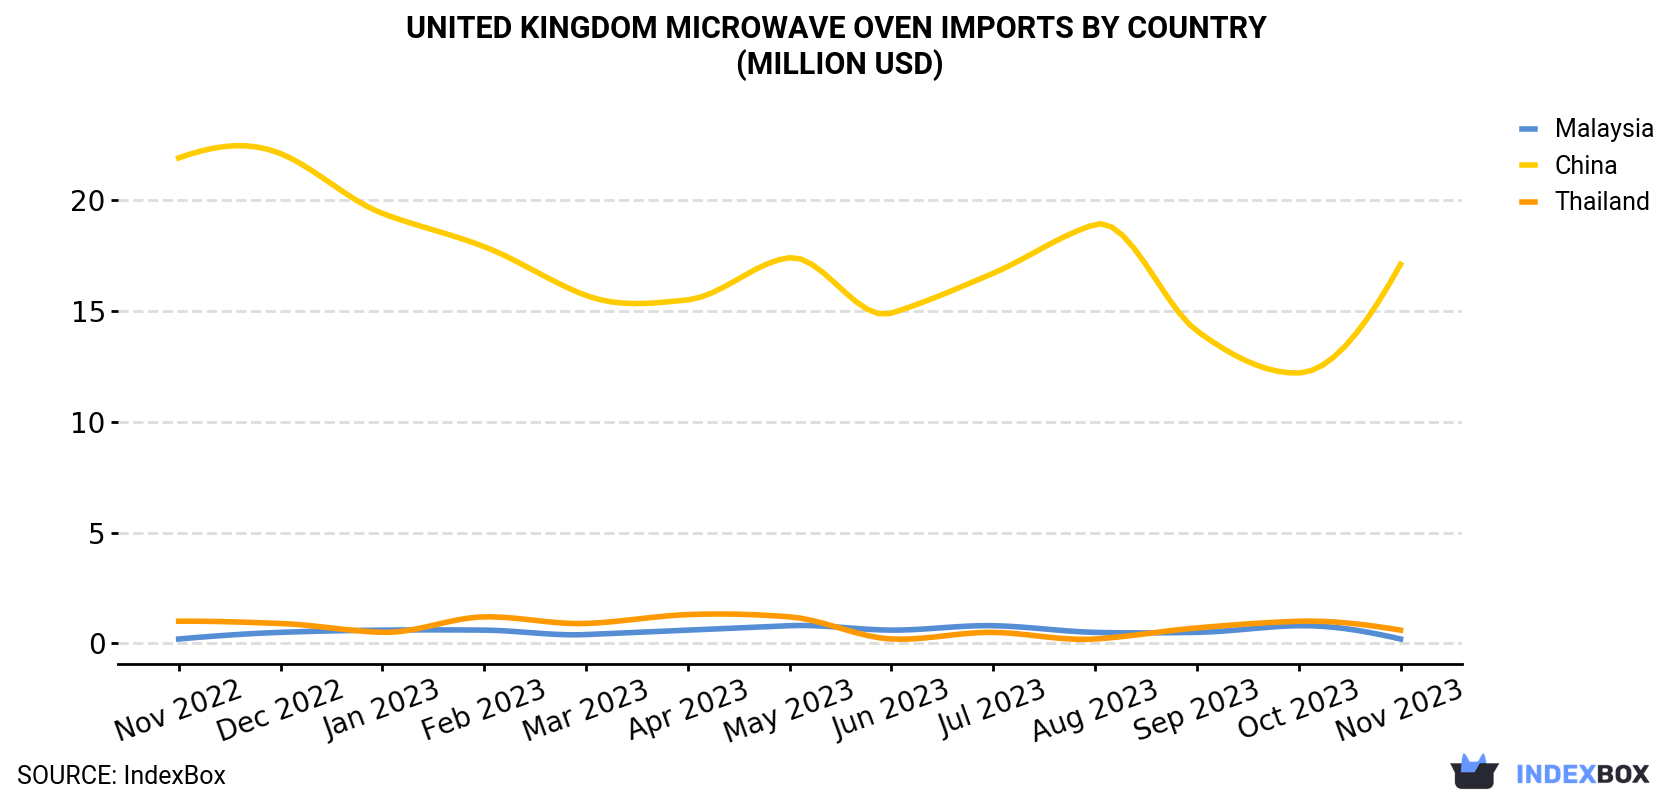 United Kingdom Microwave Oven Imports By Country (Million USD)